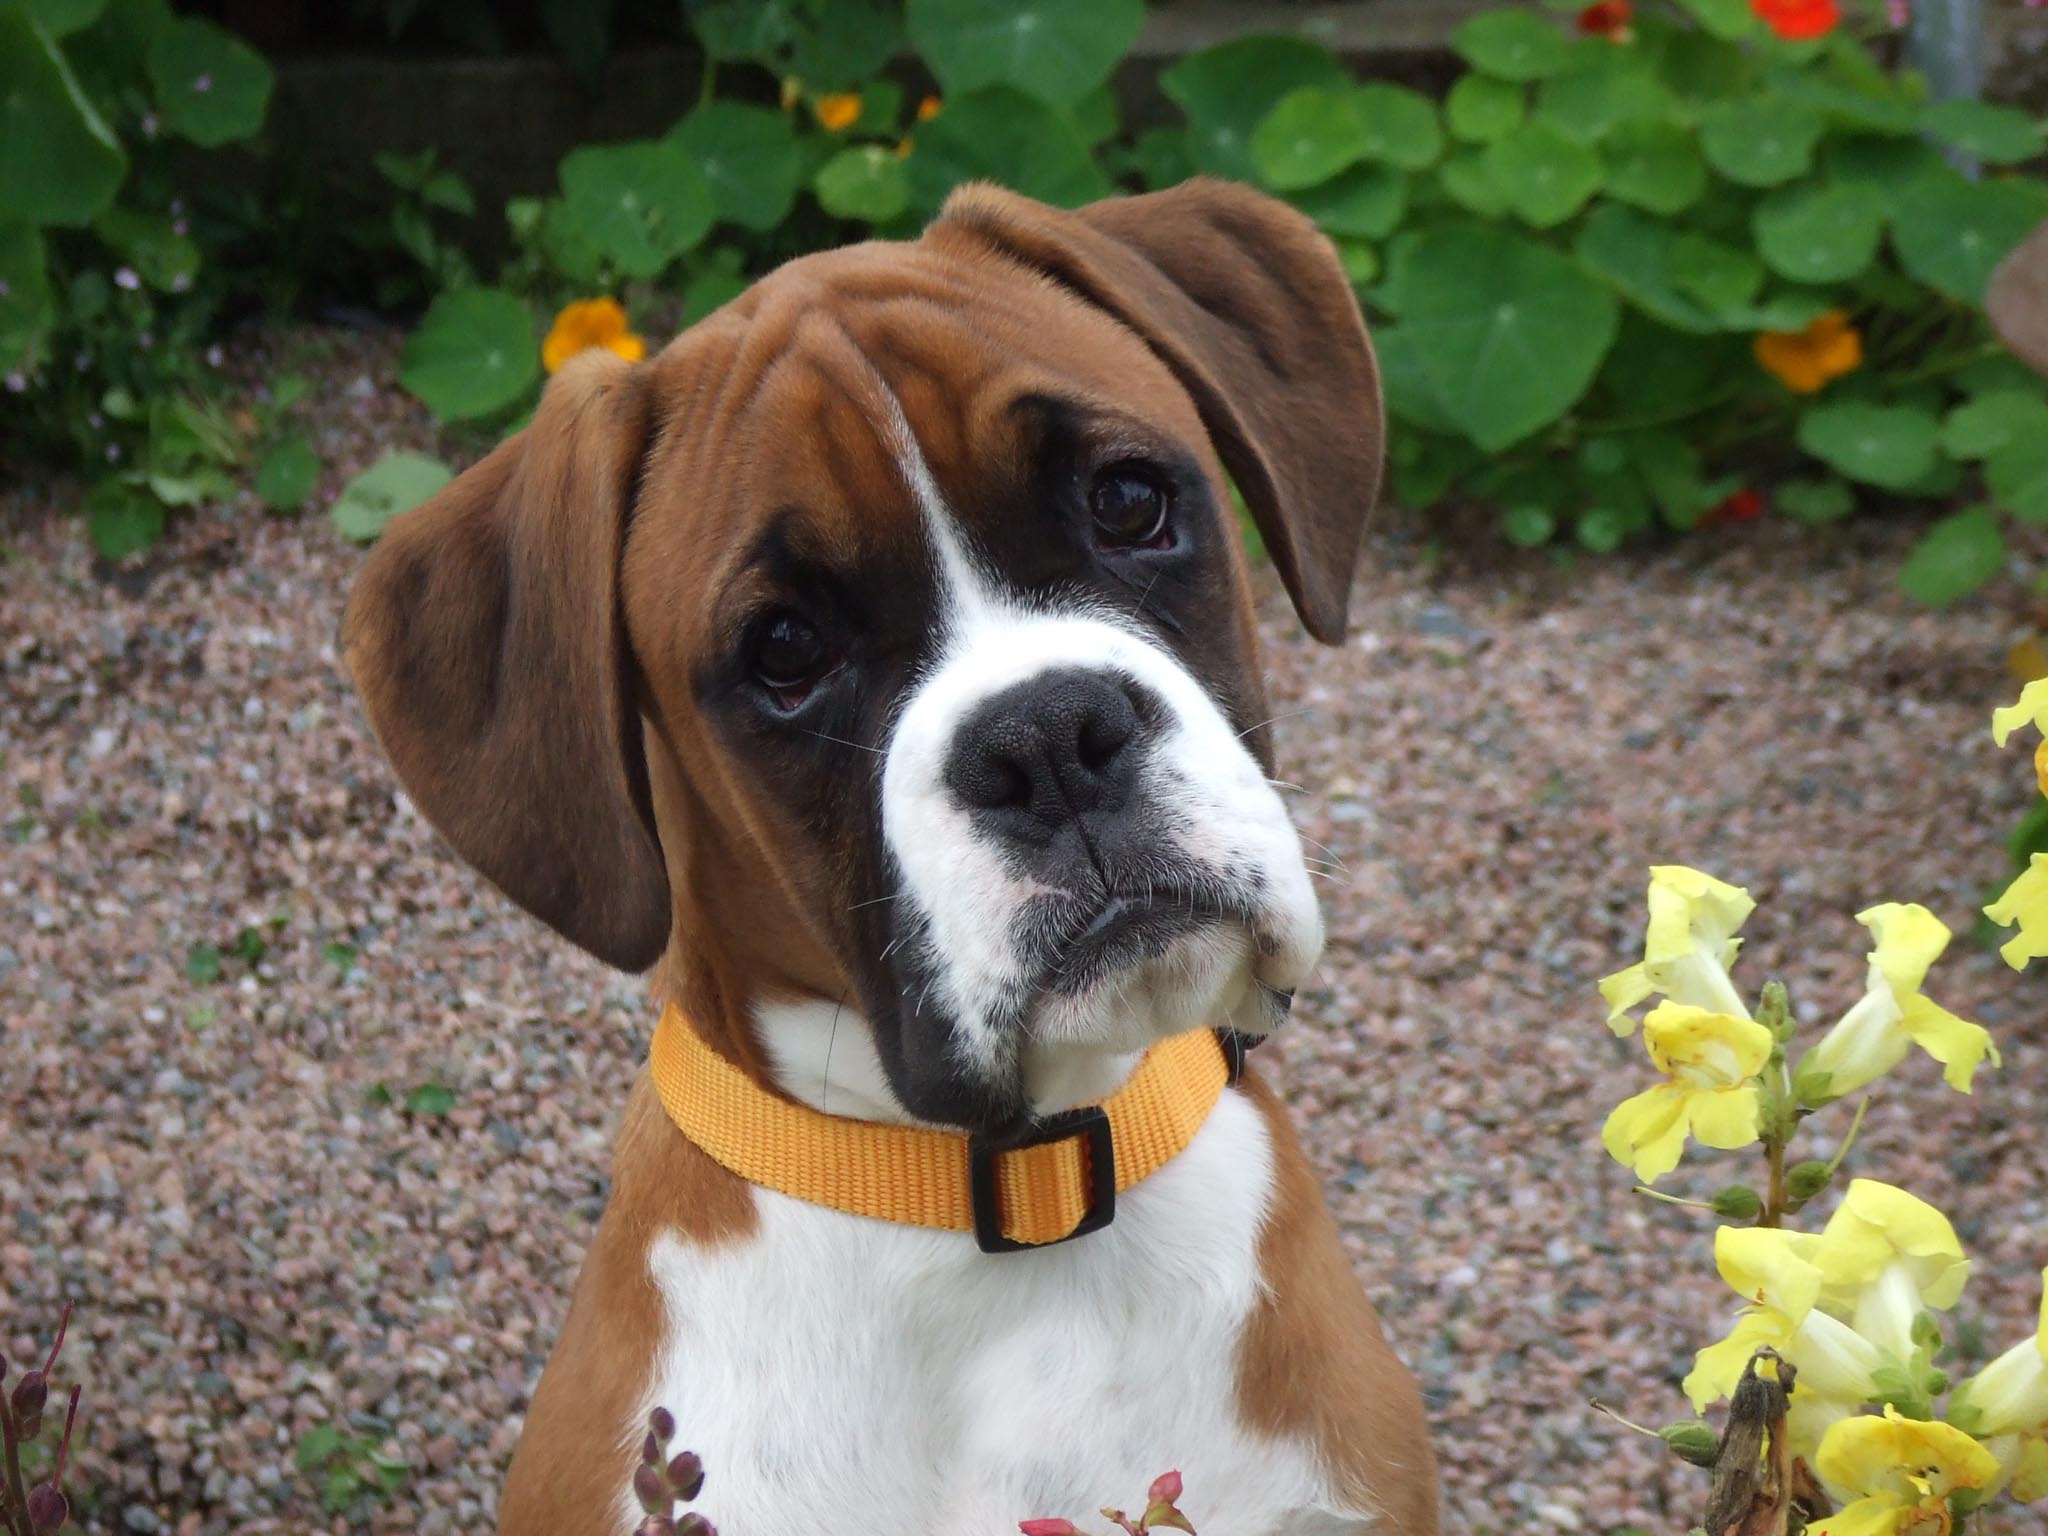 Boxer Dog Breed Guide - Learn about the Boxer Dog.